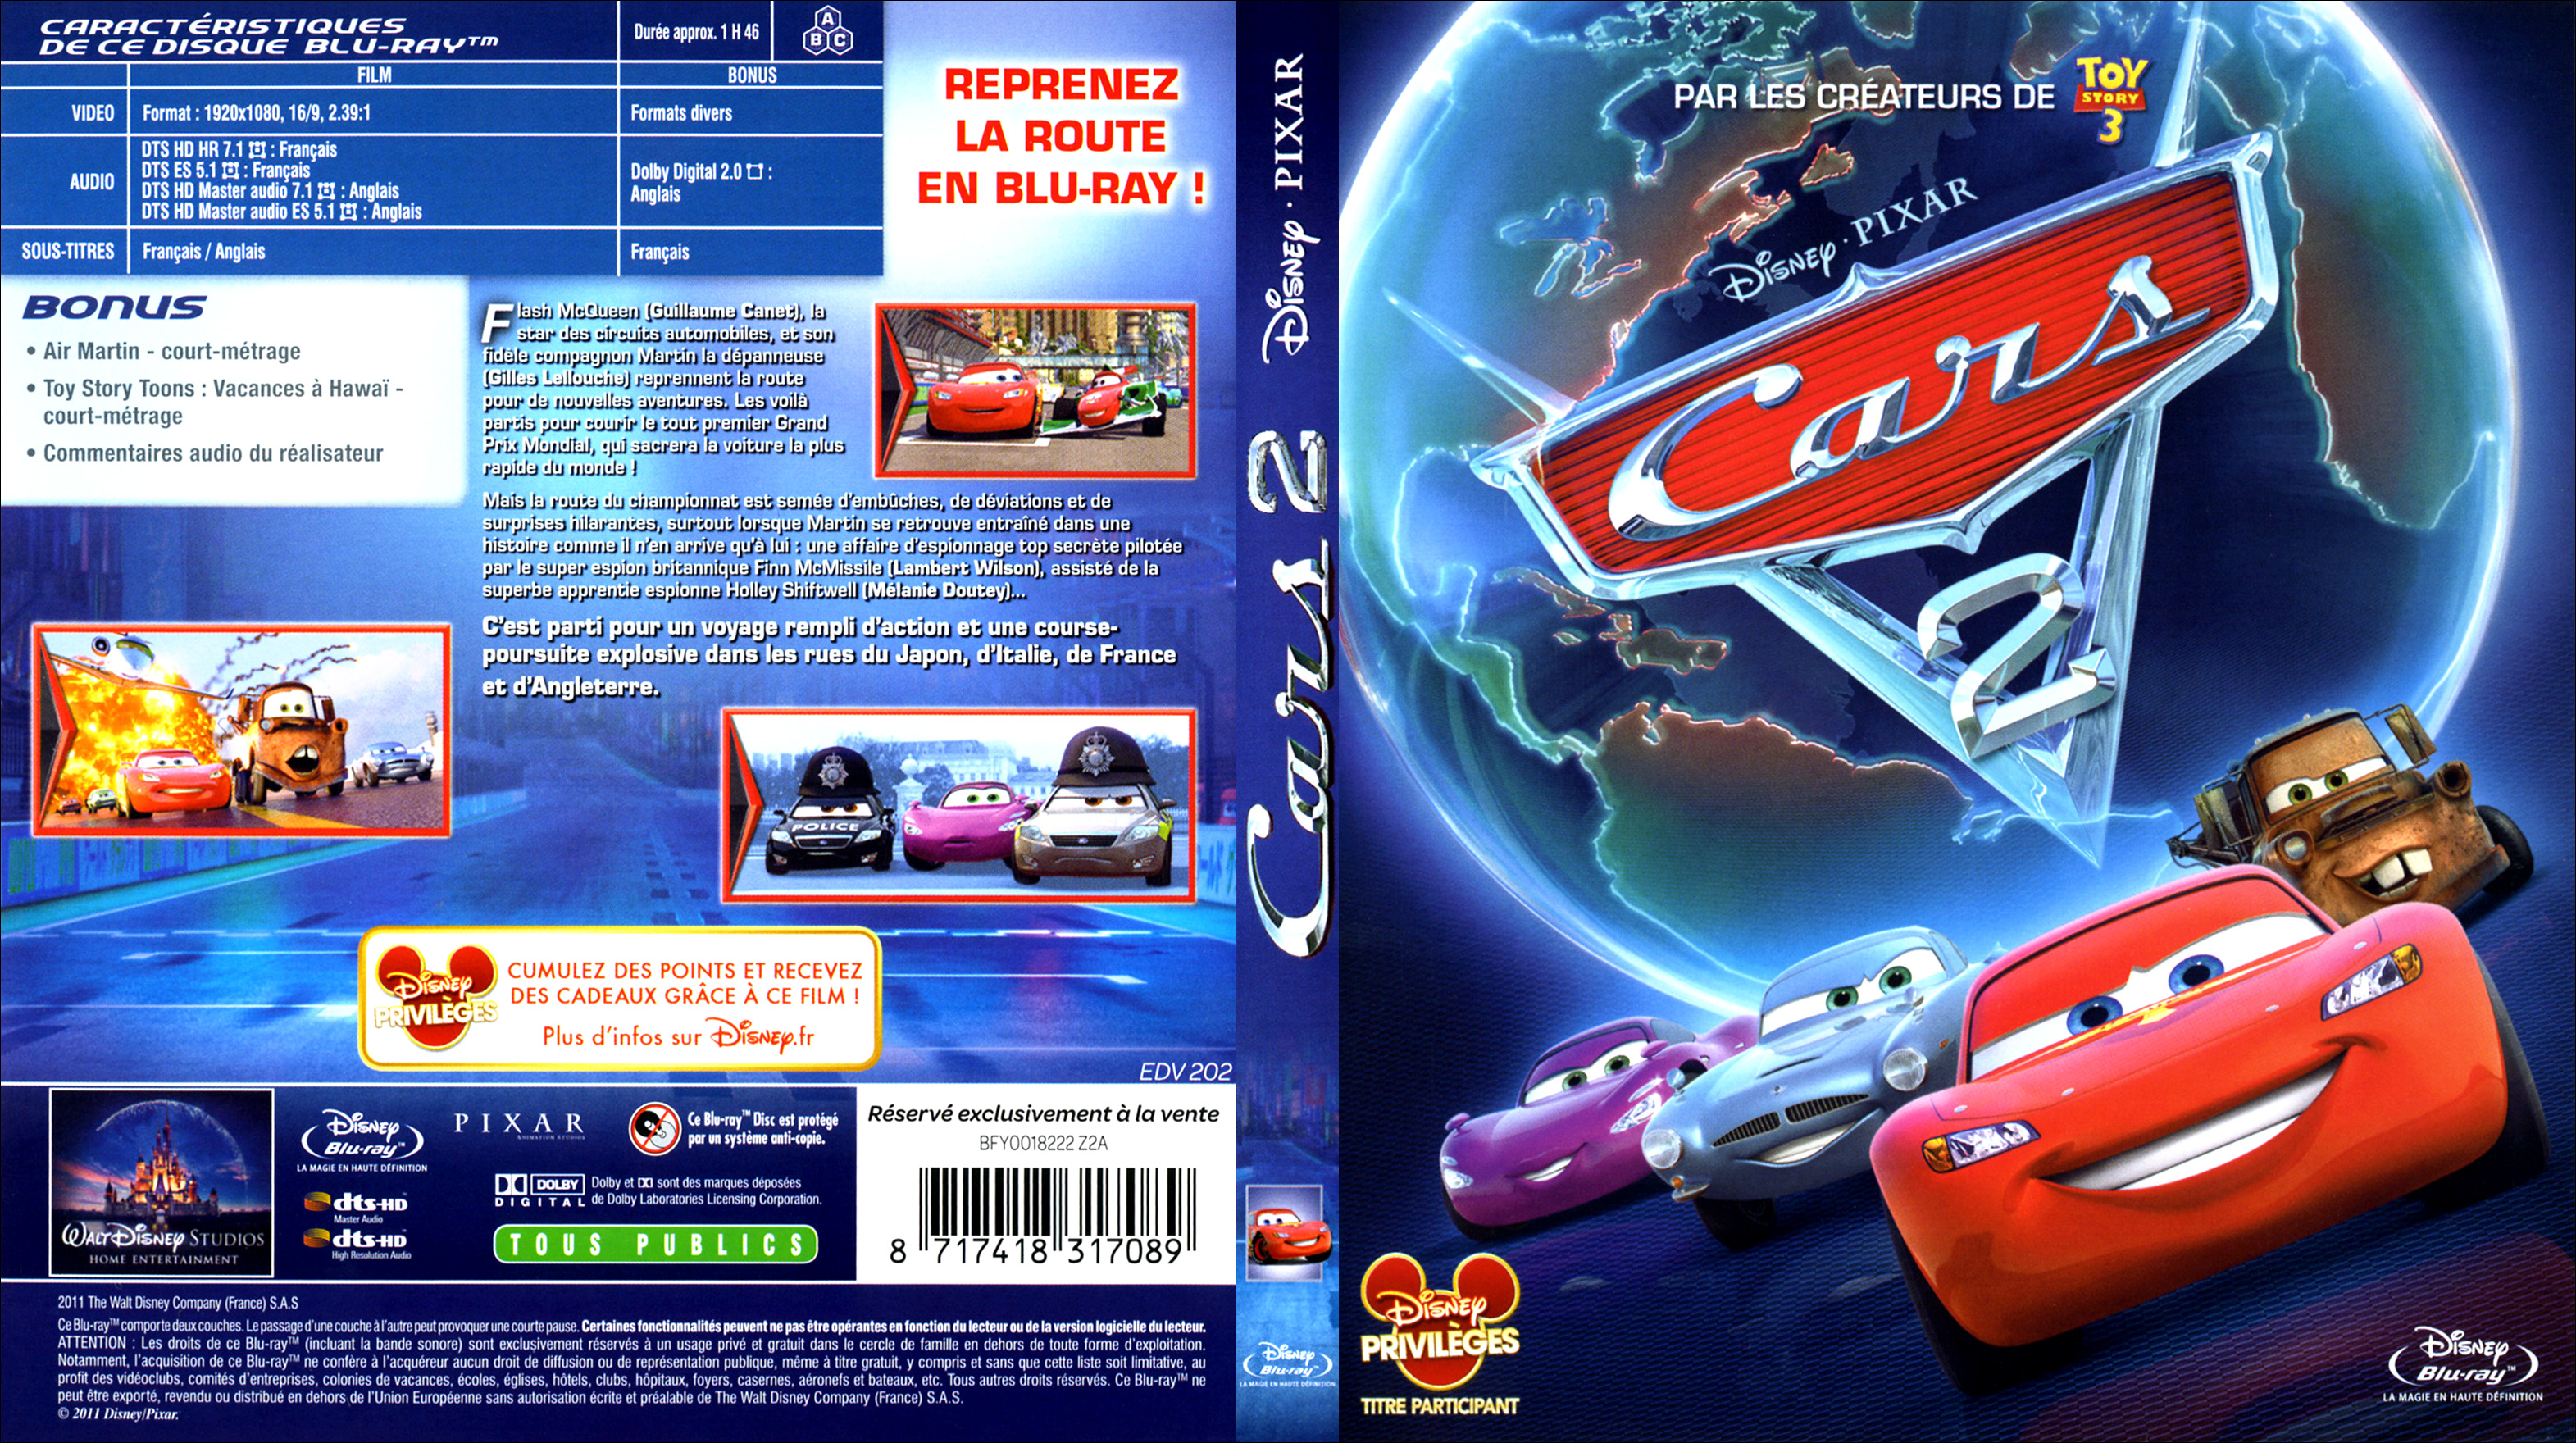 Jaquette DVD Cars 2 (BLU-RAY)